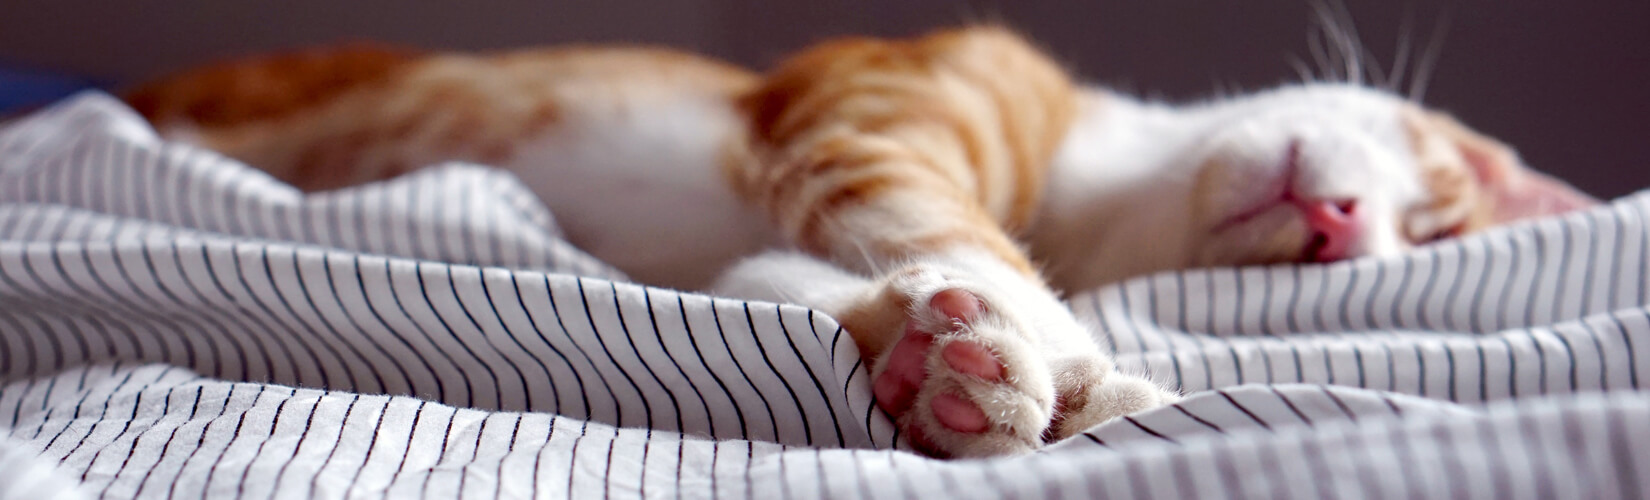 Hotels with Cats That Will Tickle Every Feline Lover's Fancy :: I've Been Bit! A Travel Blog